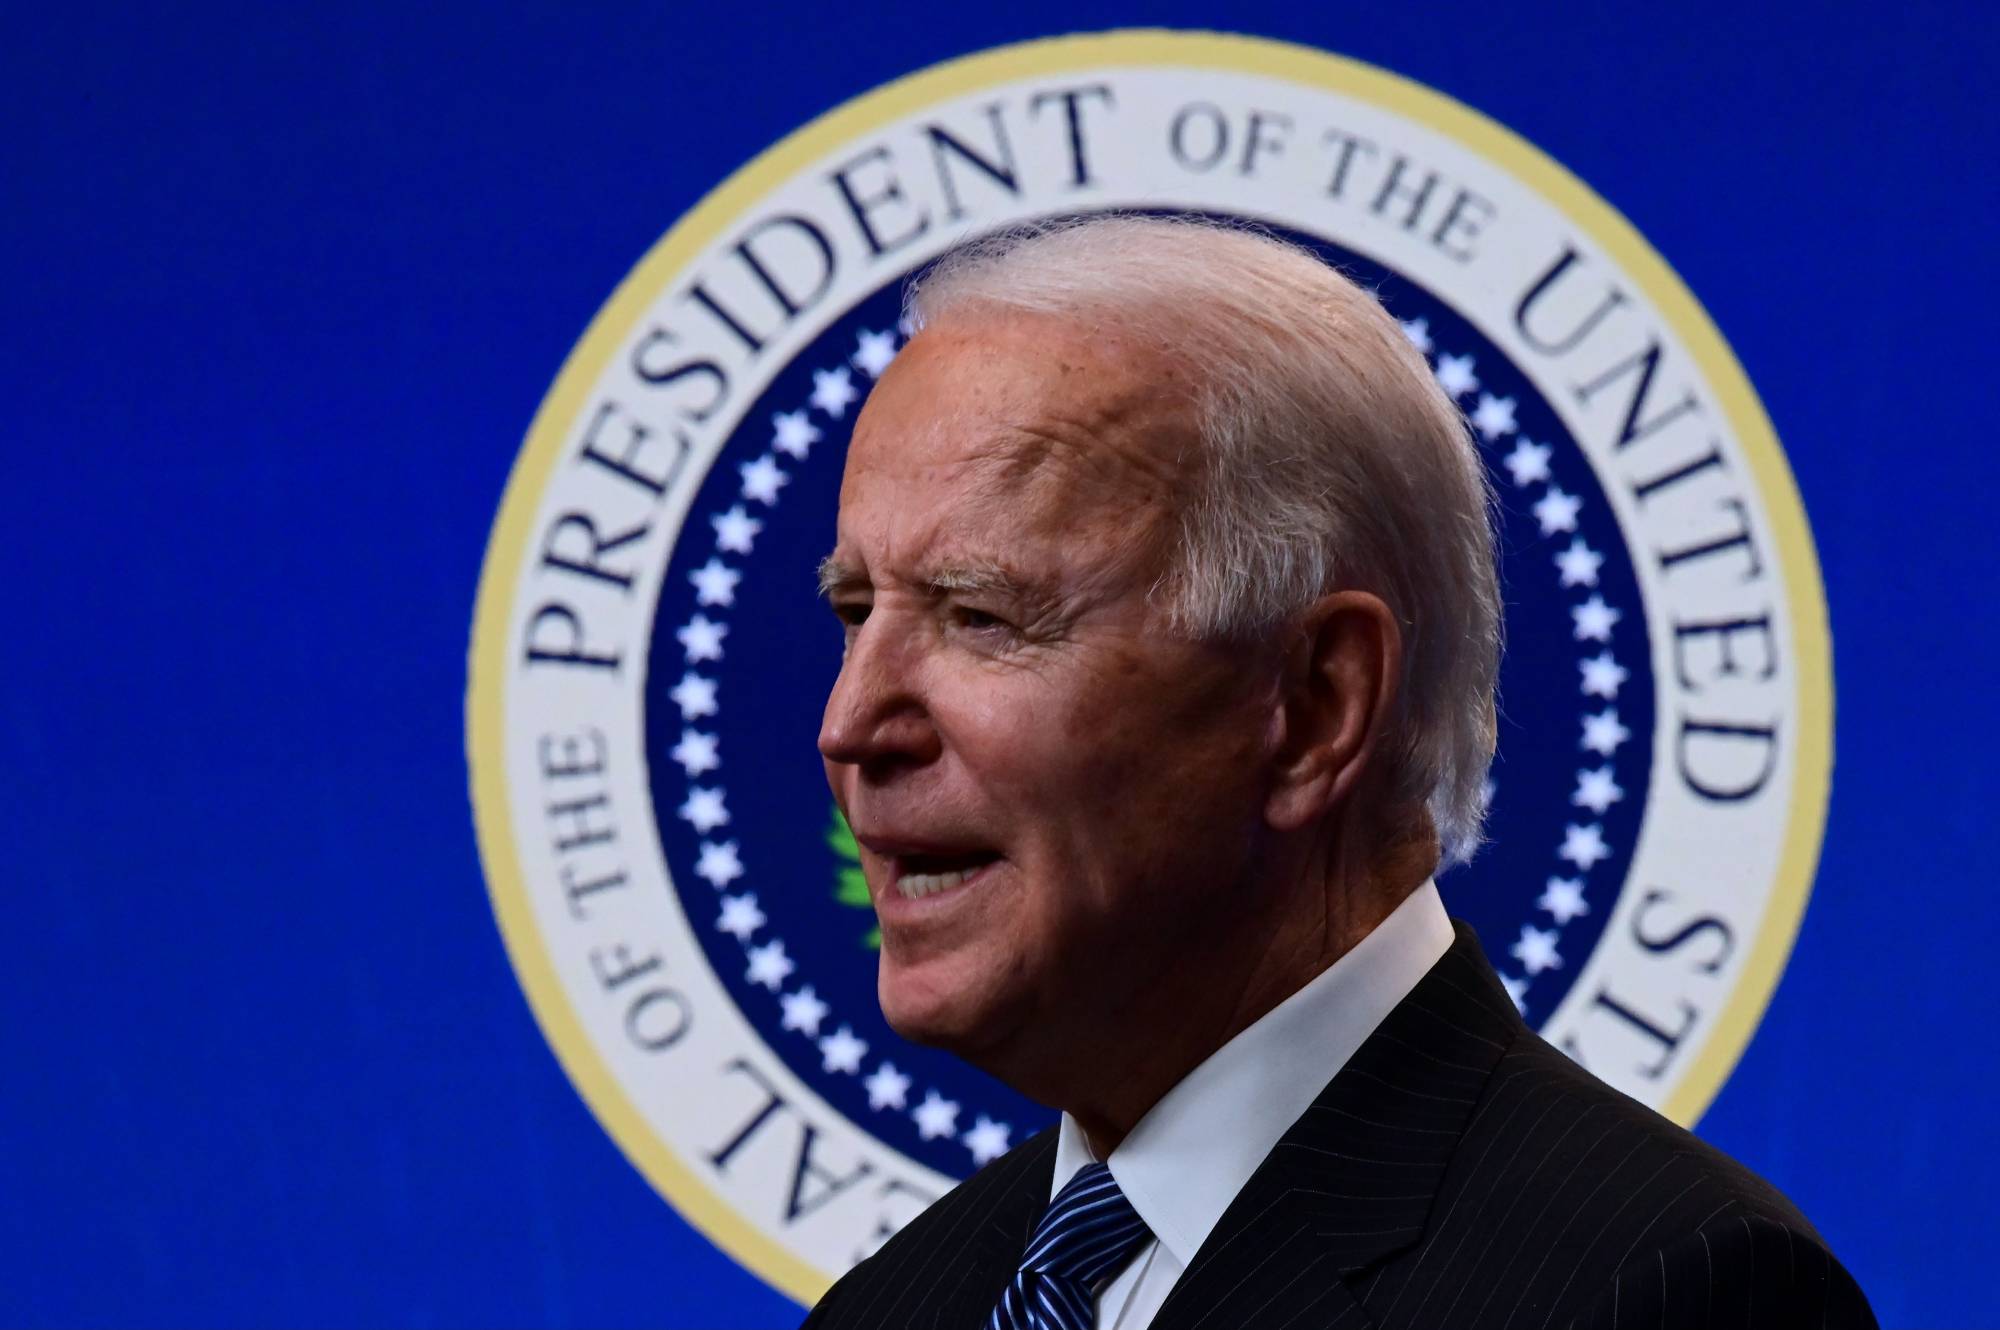 U.S. President Joe Biden delivers remarks before signing a 'Made in America' executive order at the White House in Washington on Jan. 25. In a bid to build supply chains less reliant on China, Biden is expected to sign another executive order in the coming days that lays out a new strategy for securing supply chains. | AFP-JIJI